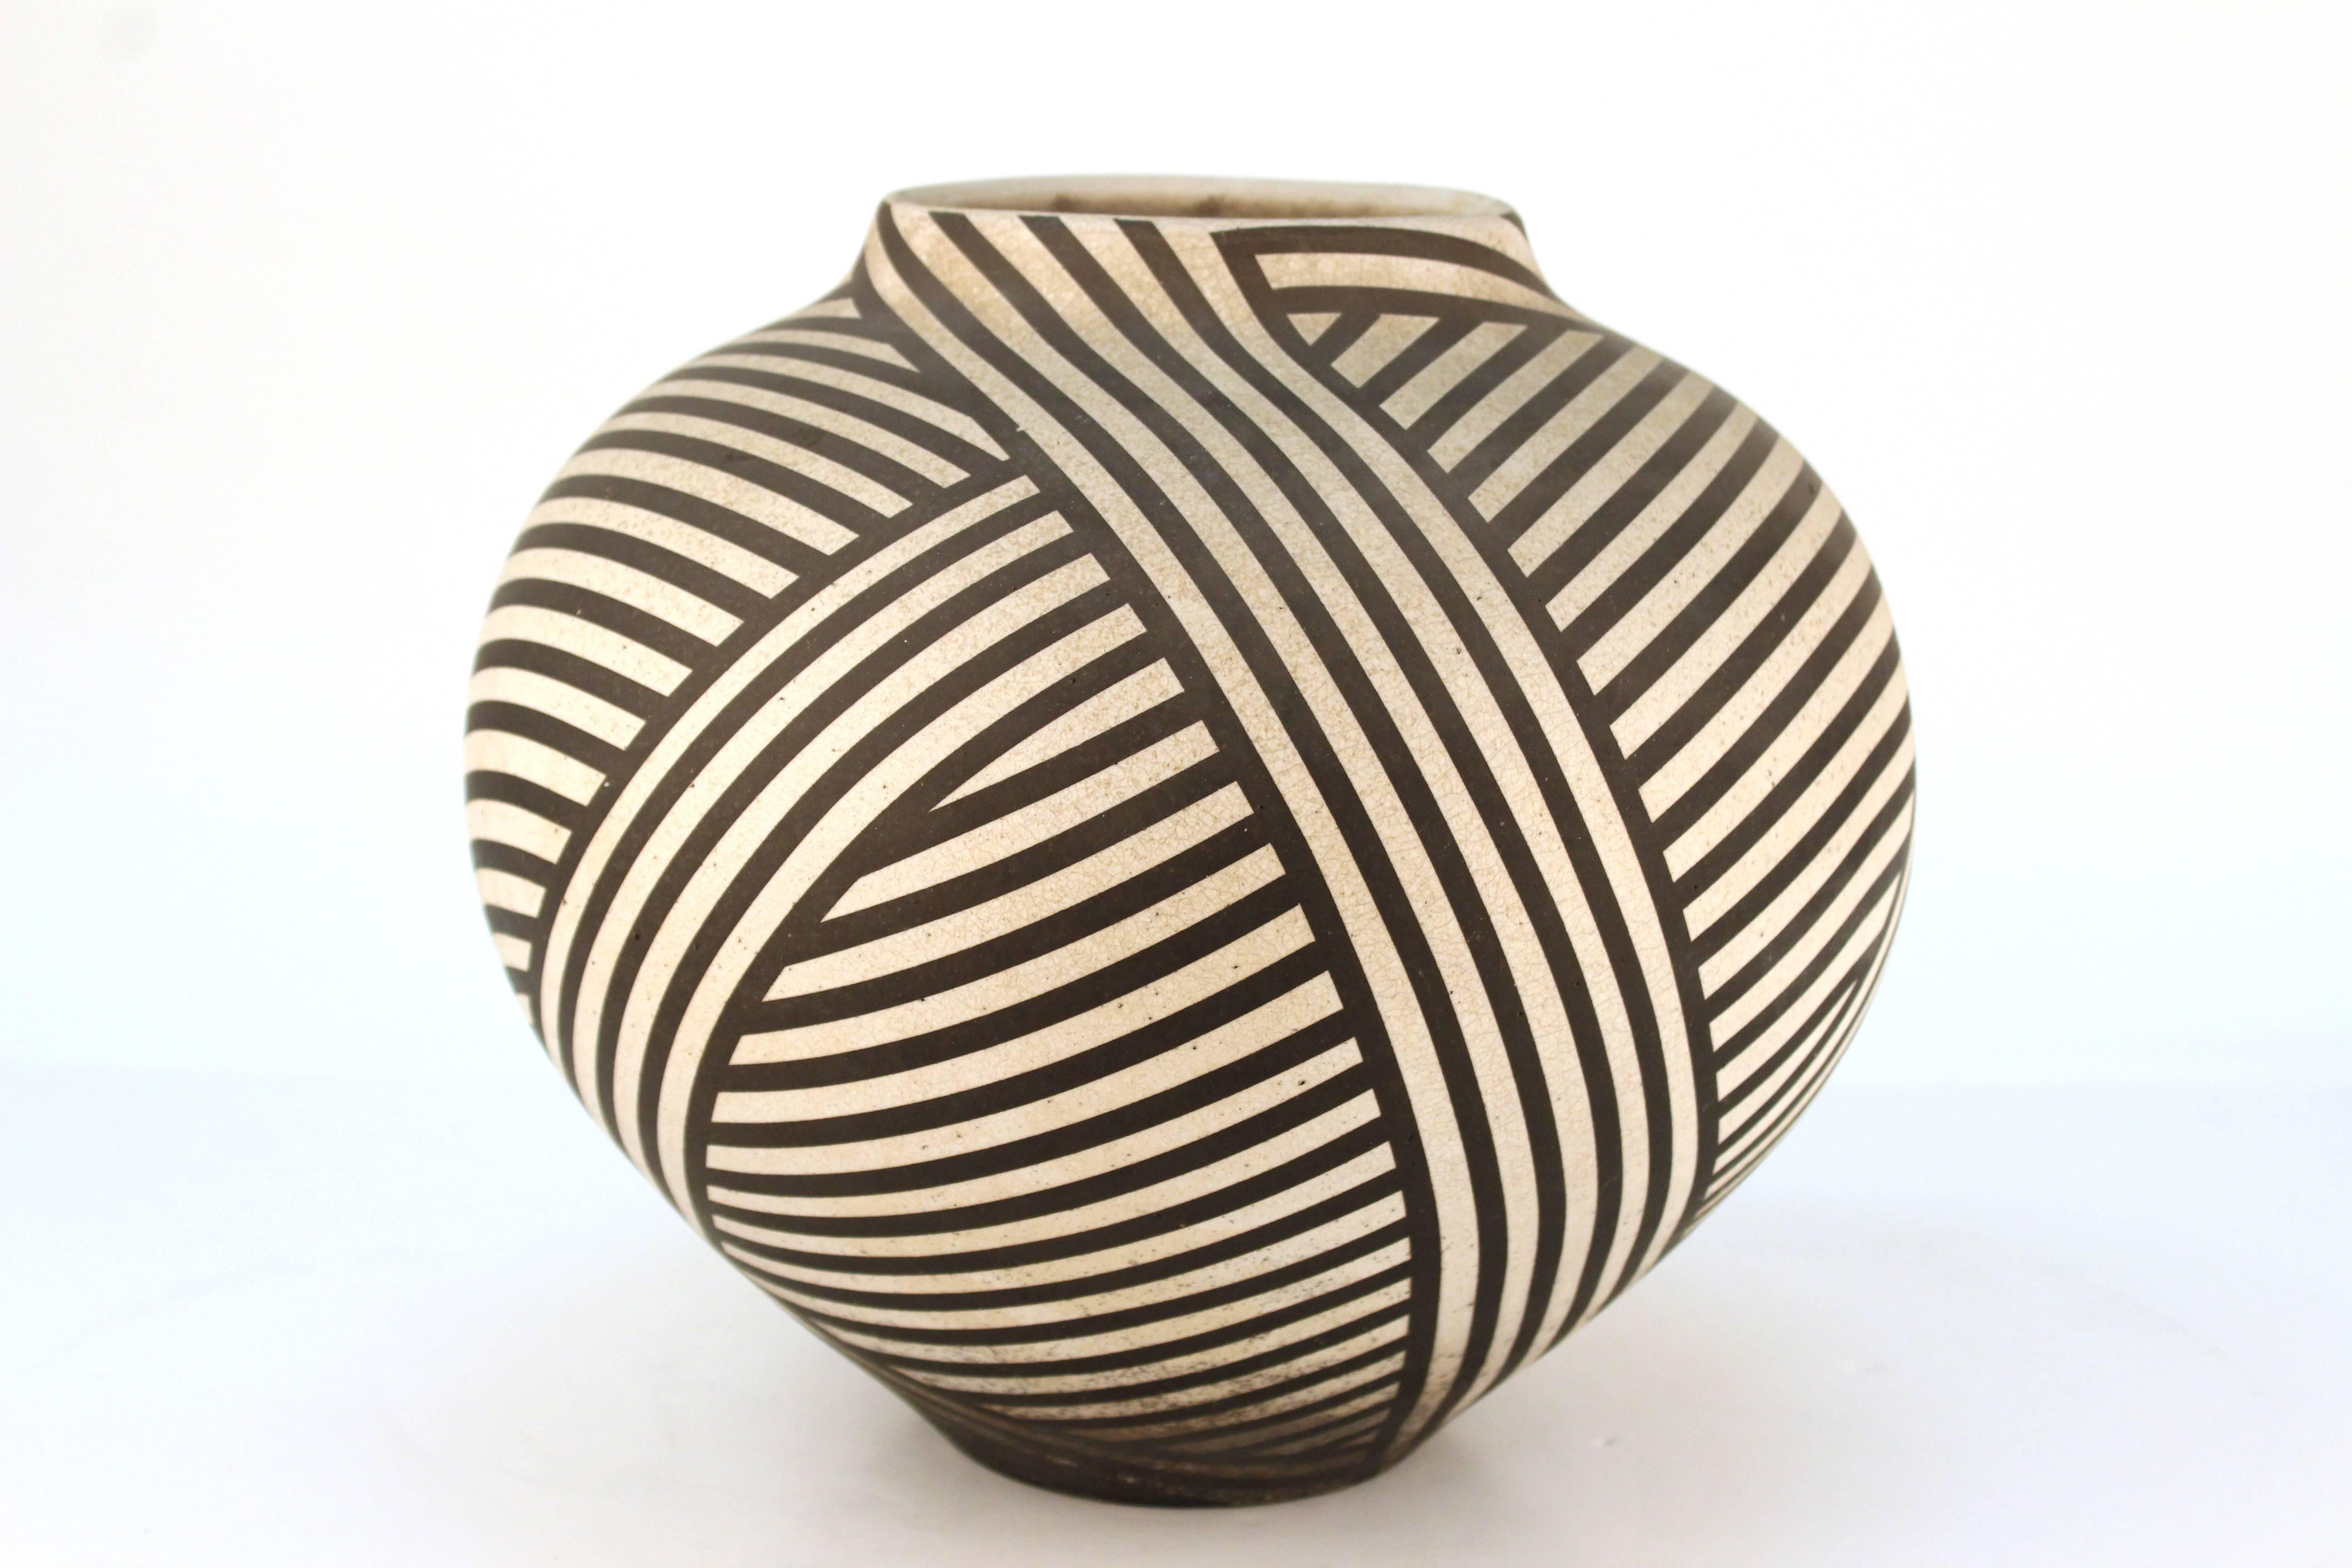 Nicholas Bernard ceramic vessel with crisscrossing layers of stripes in cream and black. Signed on bottom.

110577.